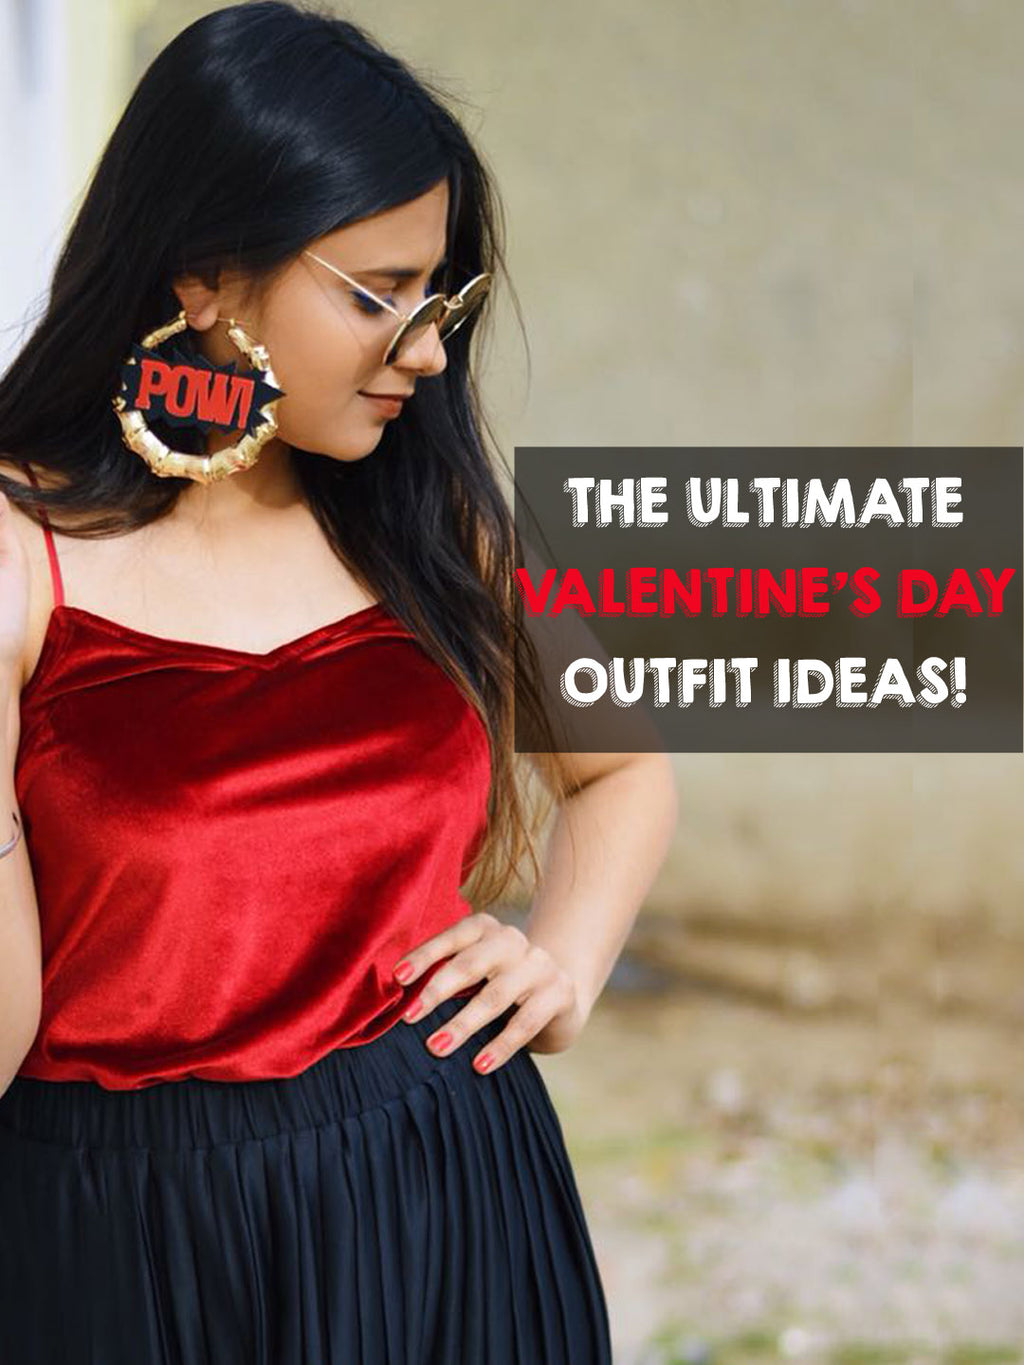 The Ultimate Valentine's Day Outfit Ideas!